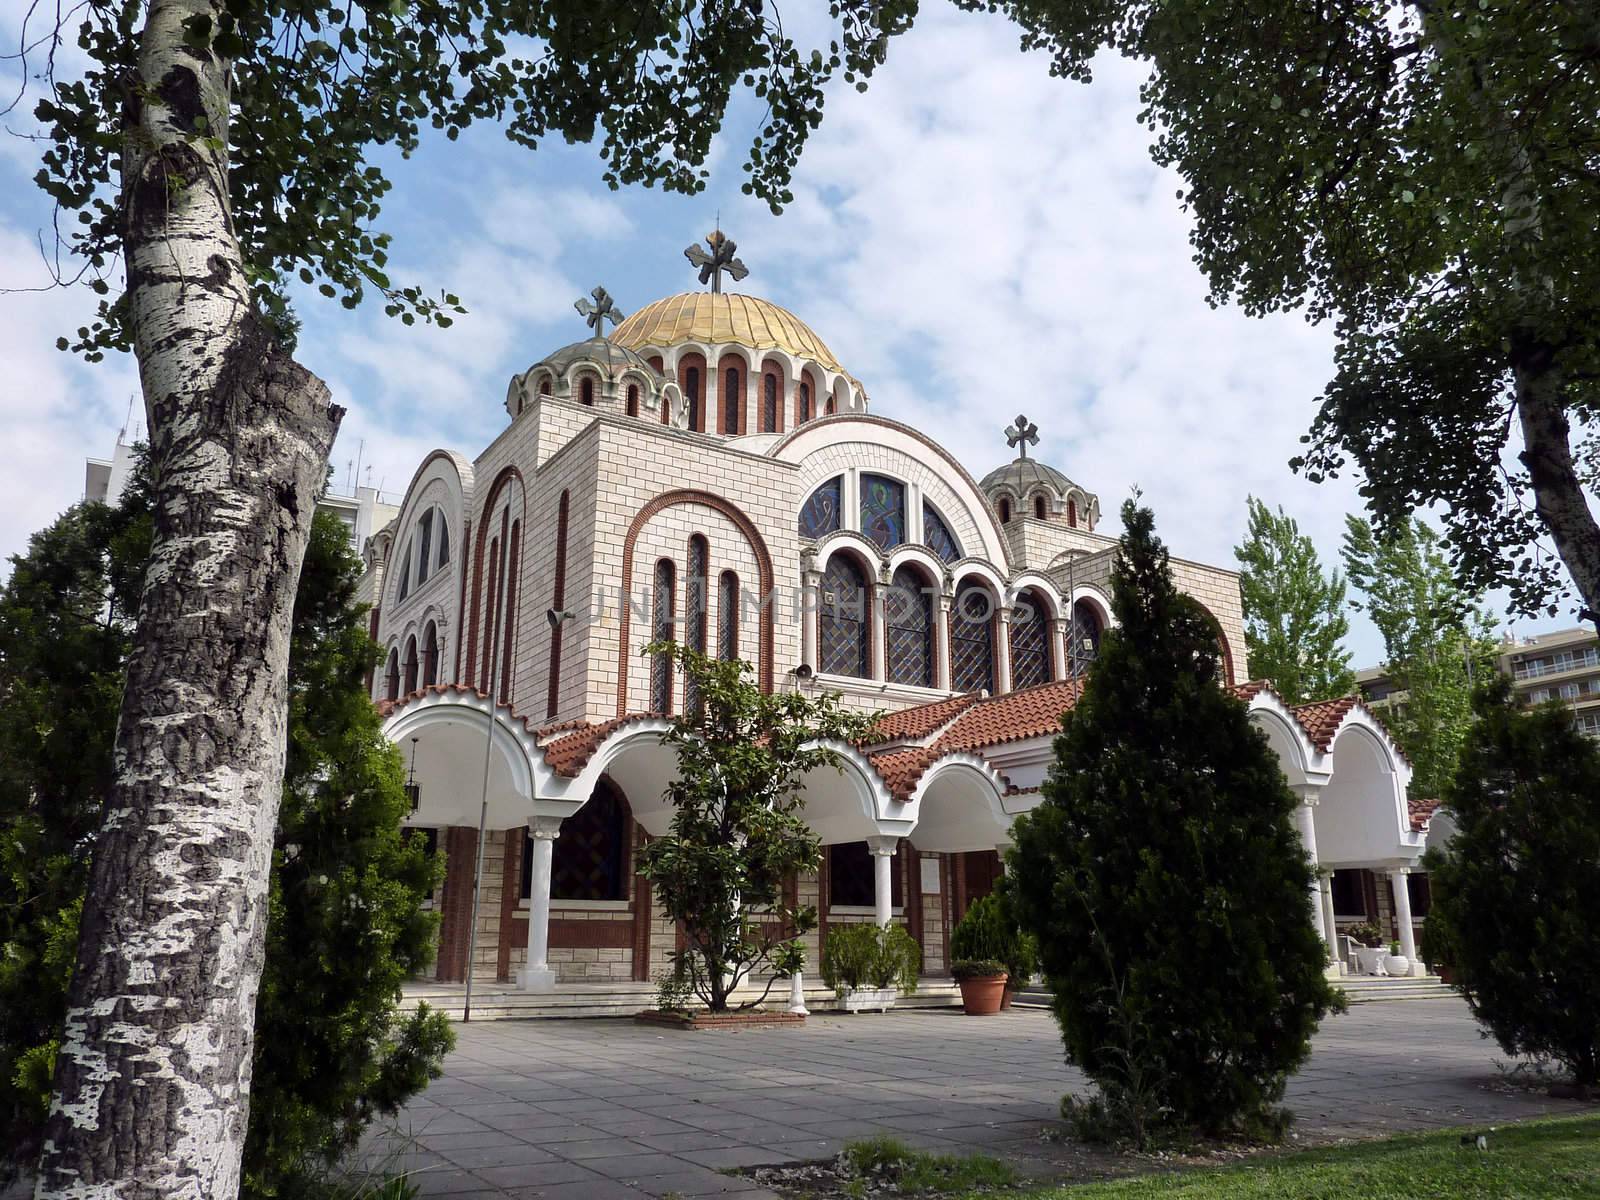 Church of Saints Cyril and Methodius in Thessaloniki, Greece, surrounded by trees by beautiful weather